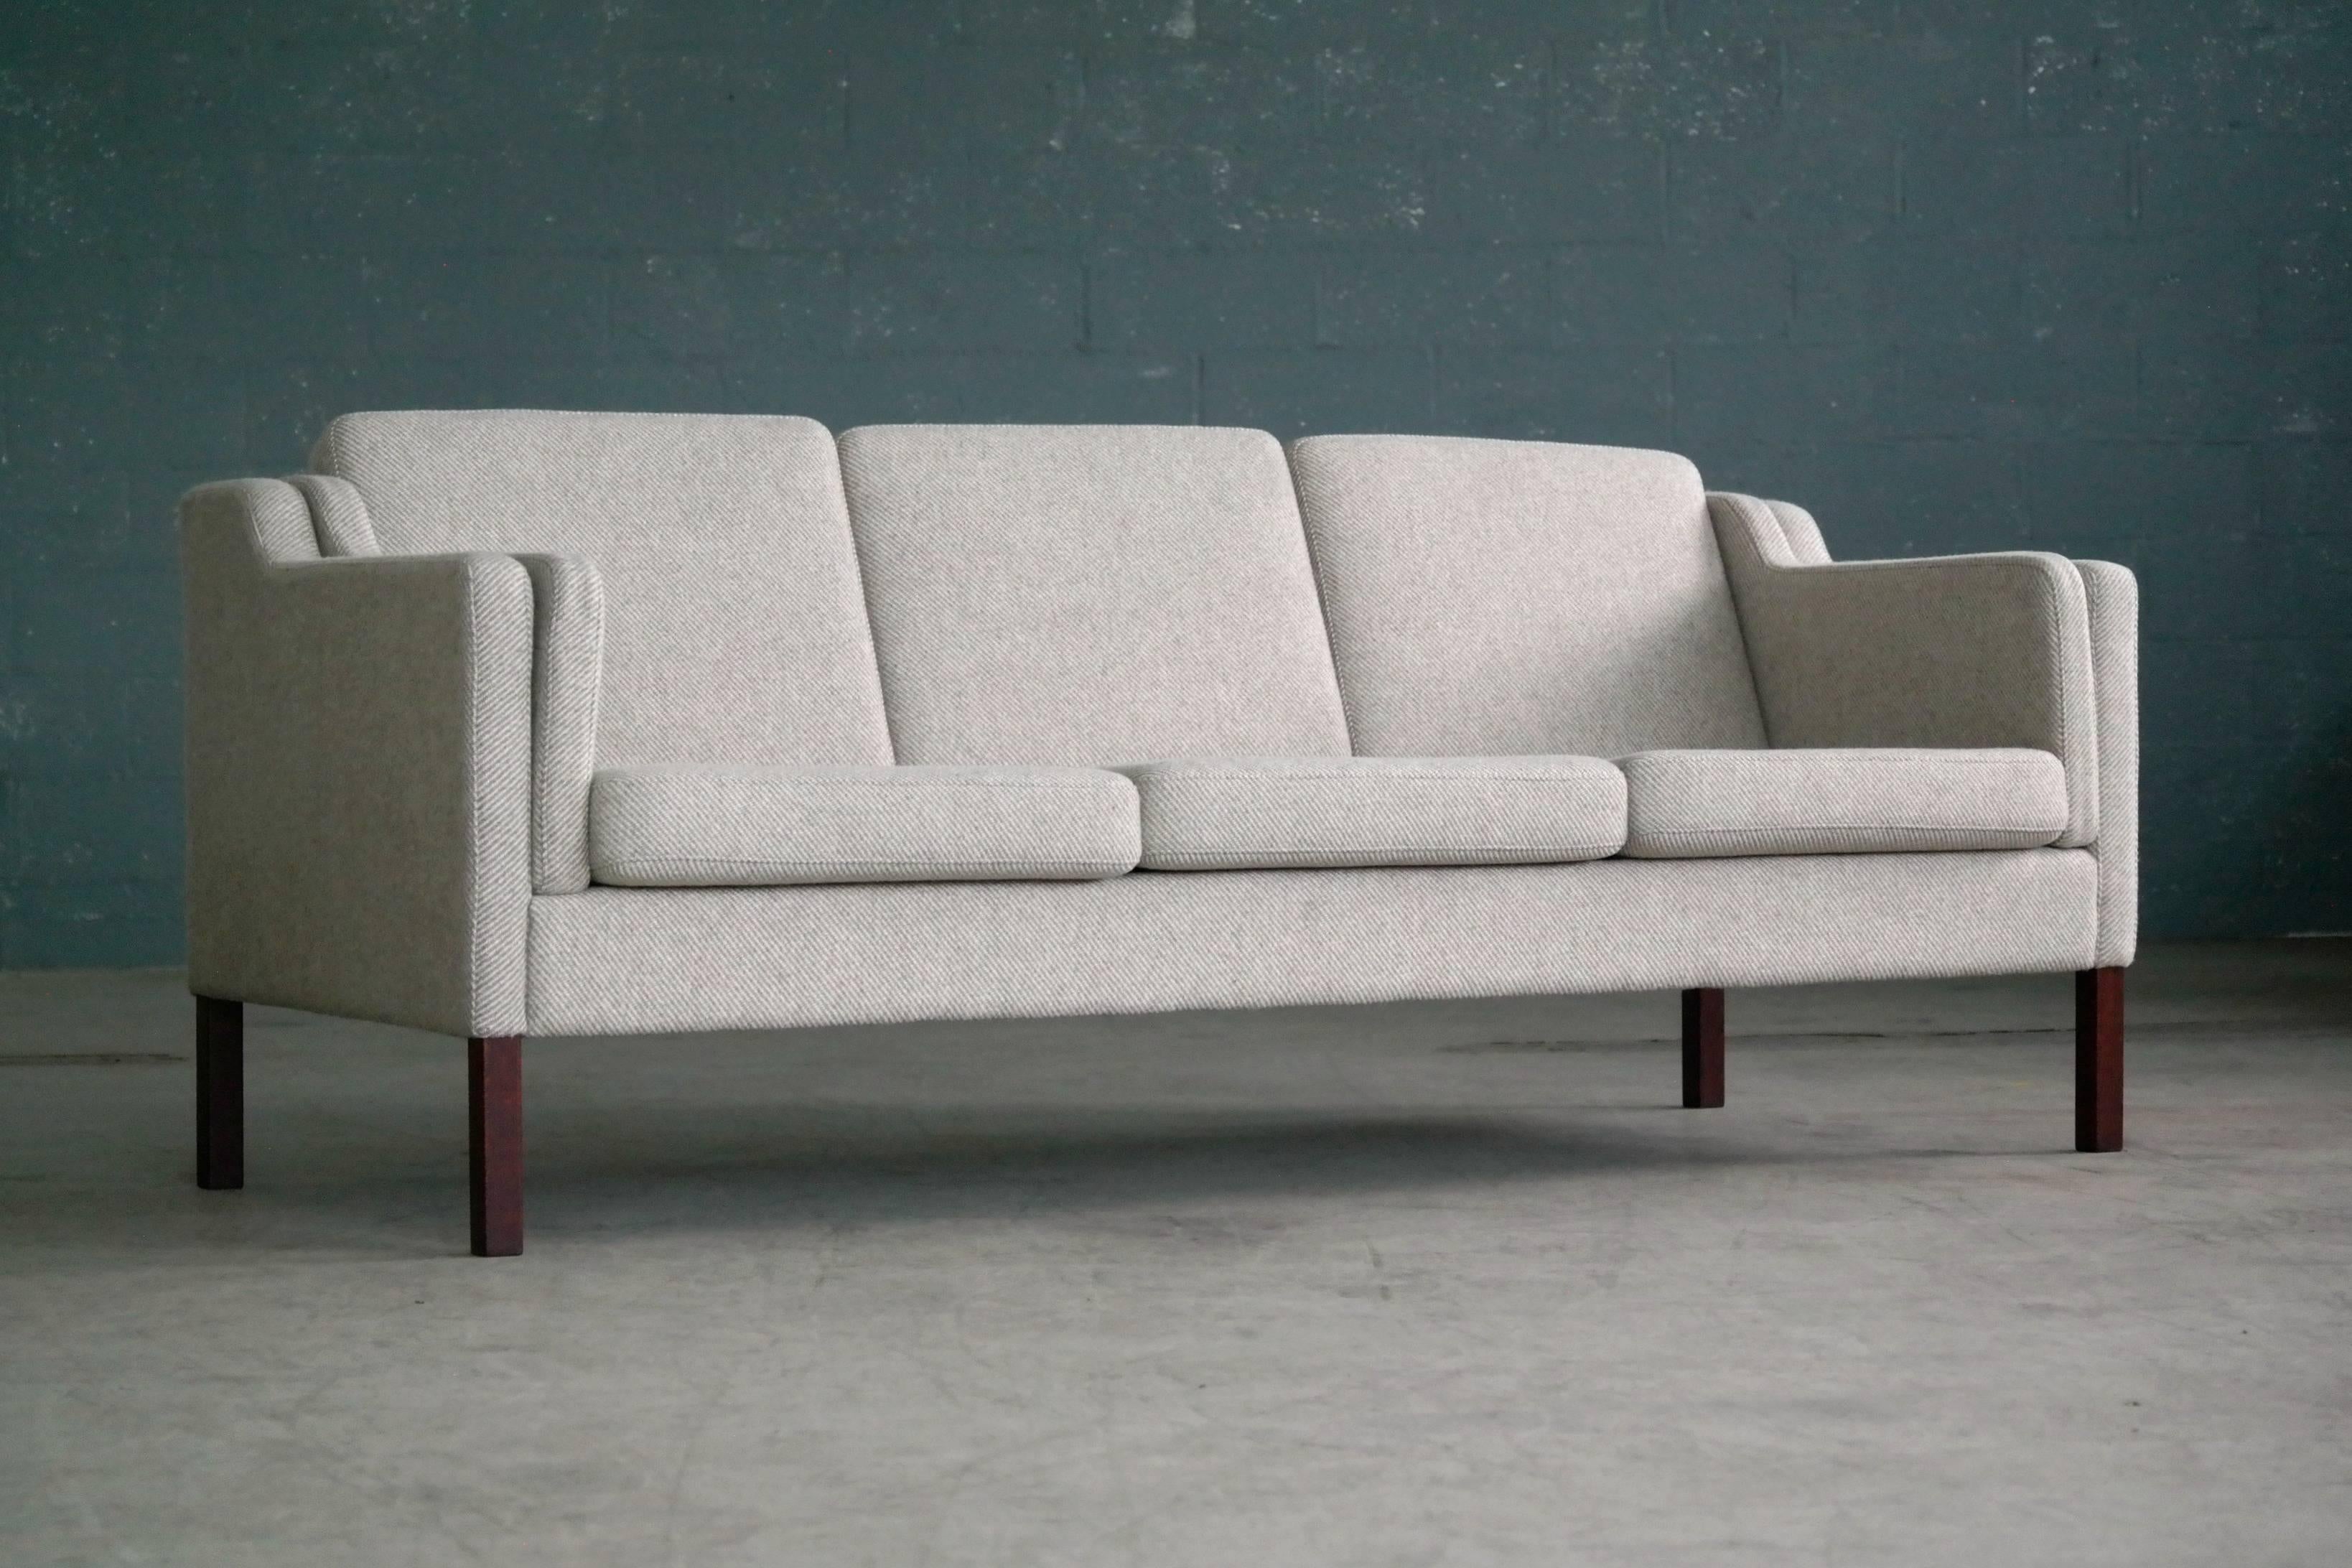 Beautiful three-seat London, sofa in style of Borge Mogensen's famous model 2213 covered in a high quality grey wool raised on stained beech legs. This style sofa originally called a London sofa when first designed by Borge Mogensen is probably one